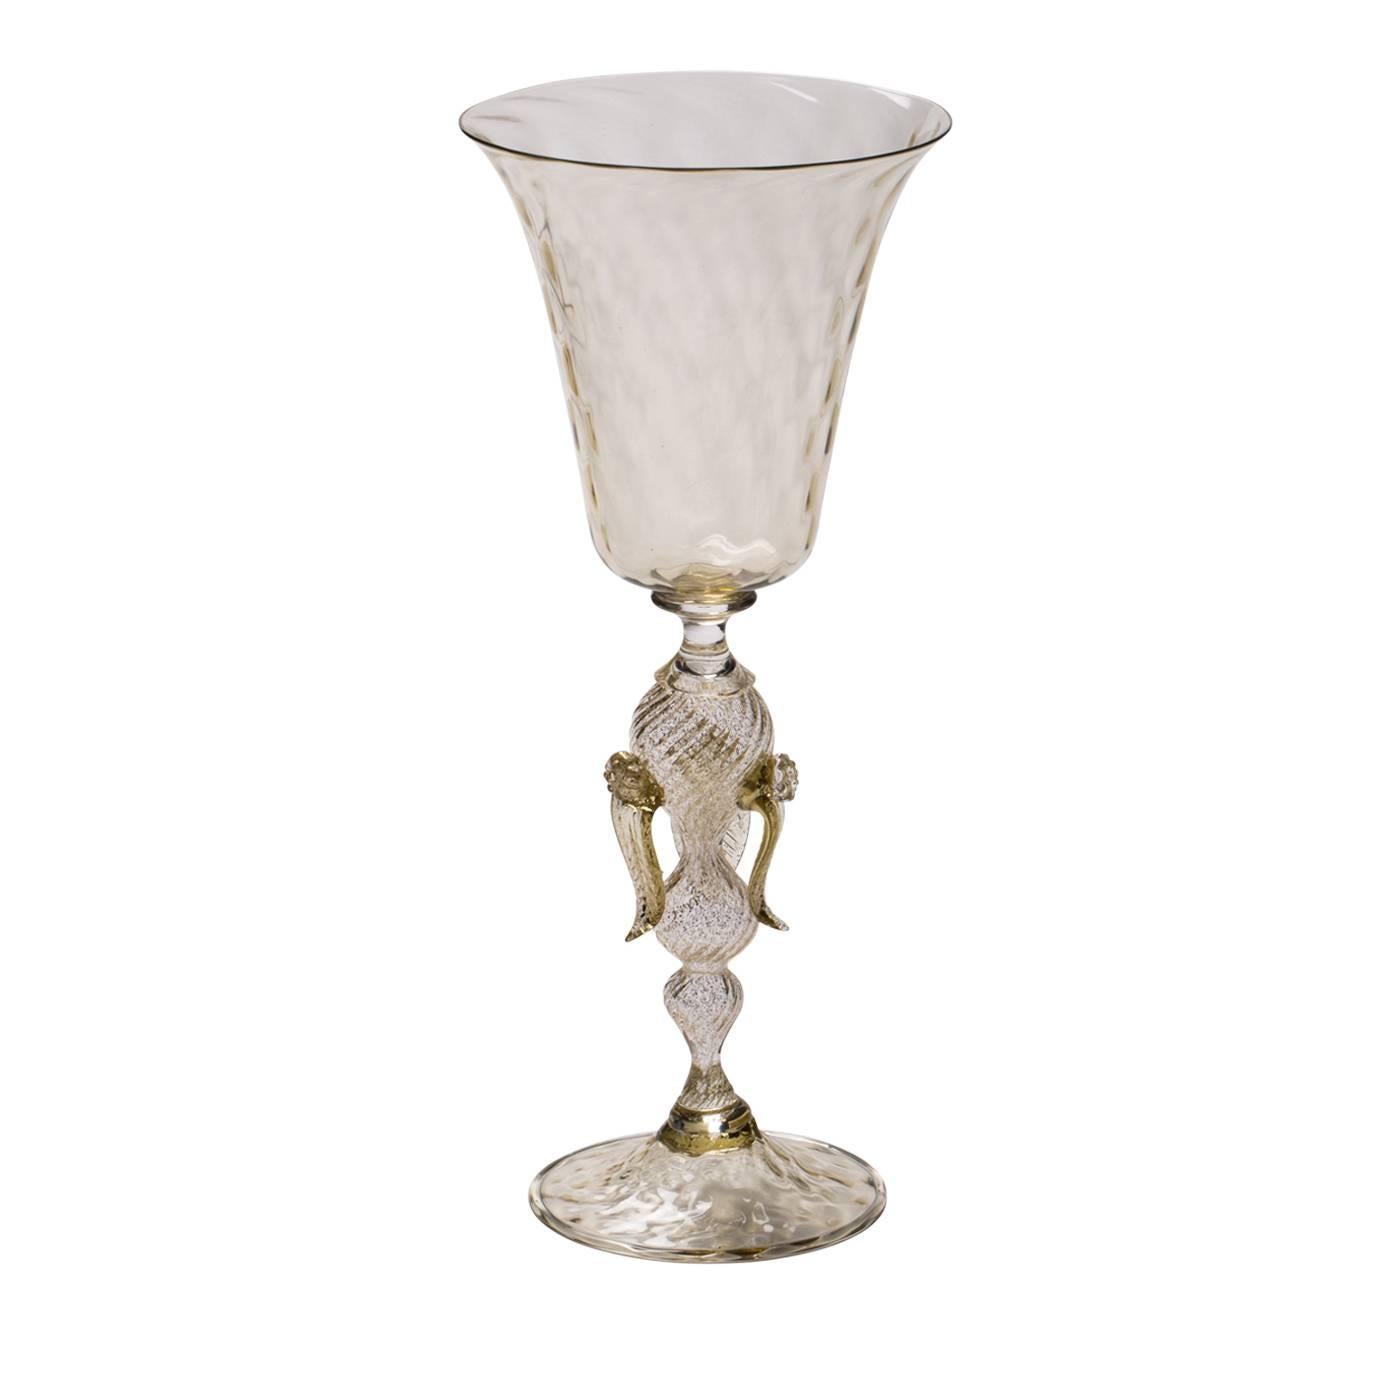 Elaborate elegance abounds in this glittering set of four champagne glasses. Fabiano Amadi's eye for fresh but elegant designs and passion for glassblowing is reflected in the execution of these sophisticated Murano glass goblets. The